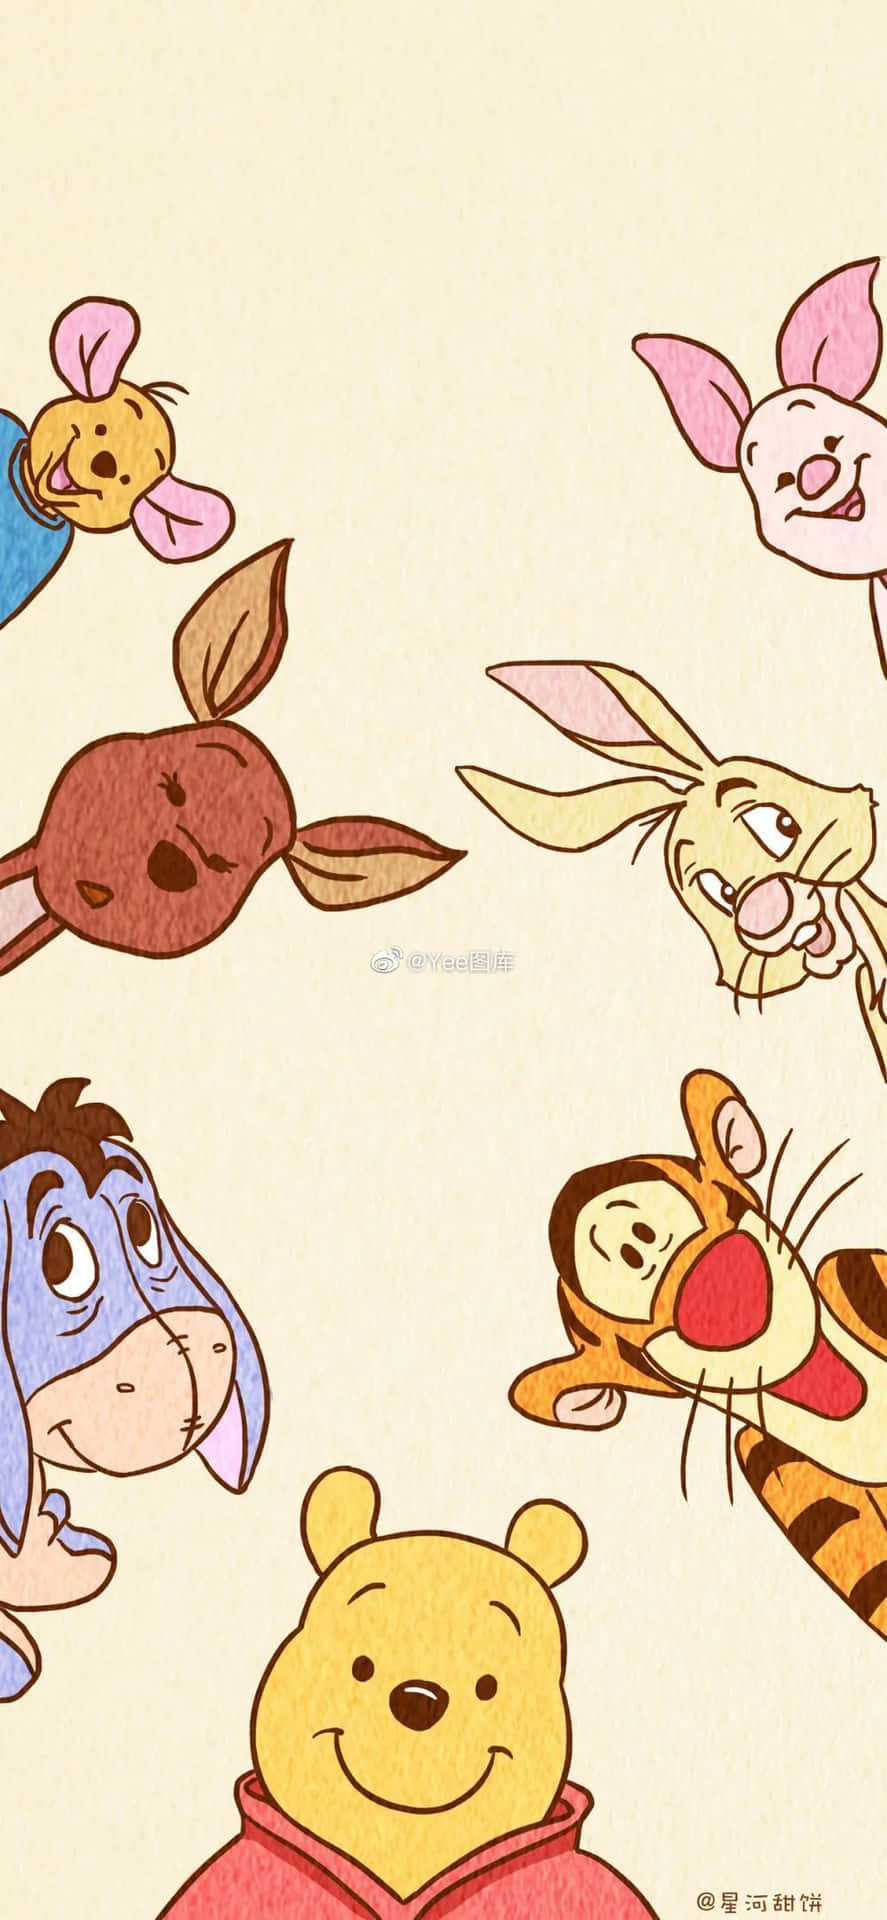 Join Pooh Bear and Friends on a Magical Adventure Through The Hundred Acre Wood! Wallpaper